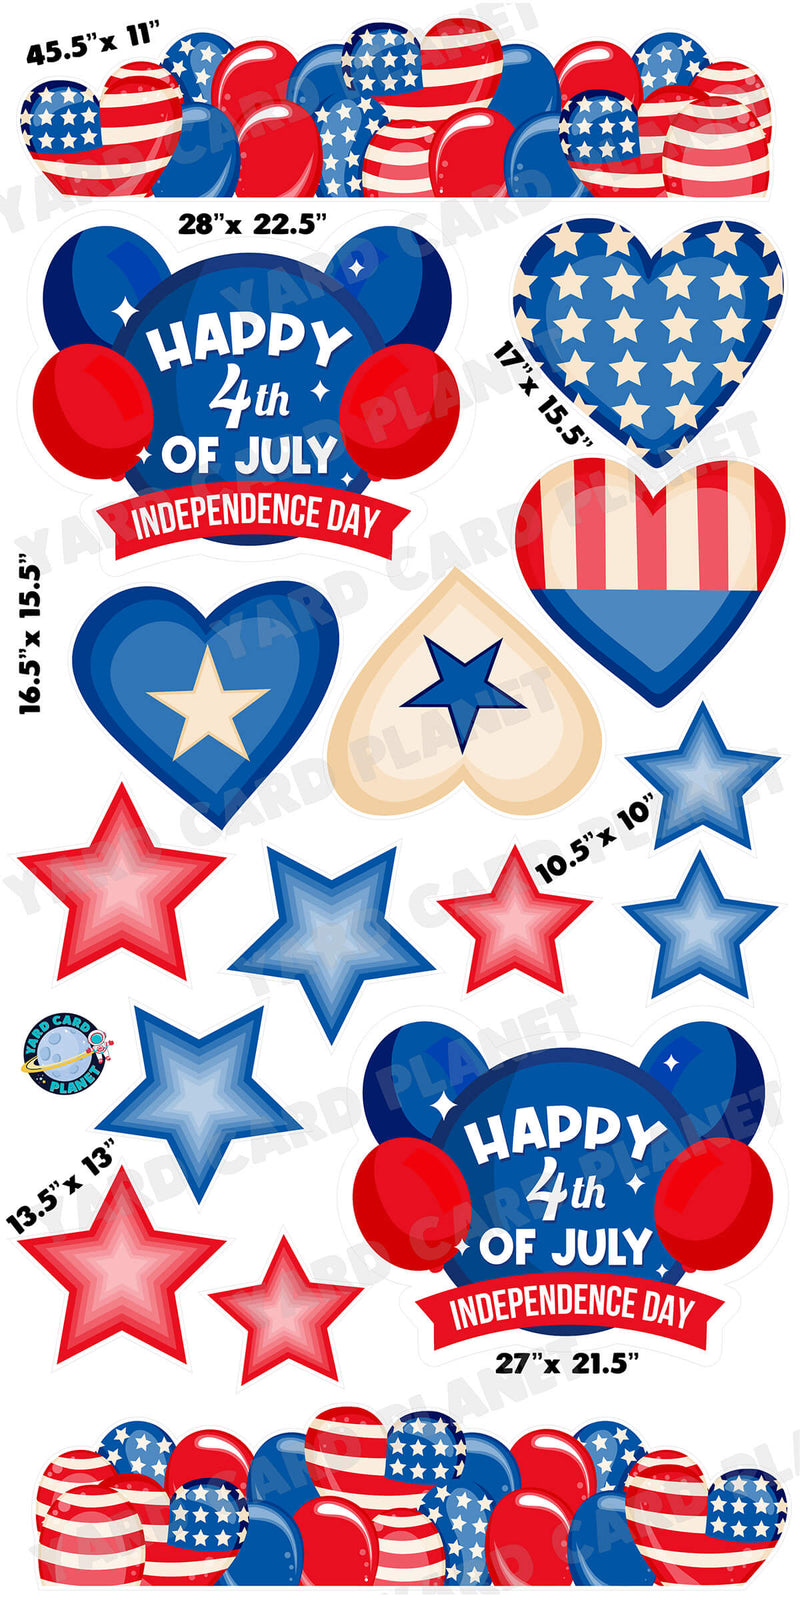 4th of July Independence Day Signs, EZ Filler Balloons, Stars and Hearts Yard Card Flair Set